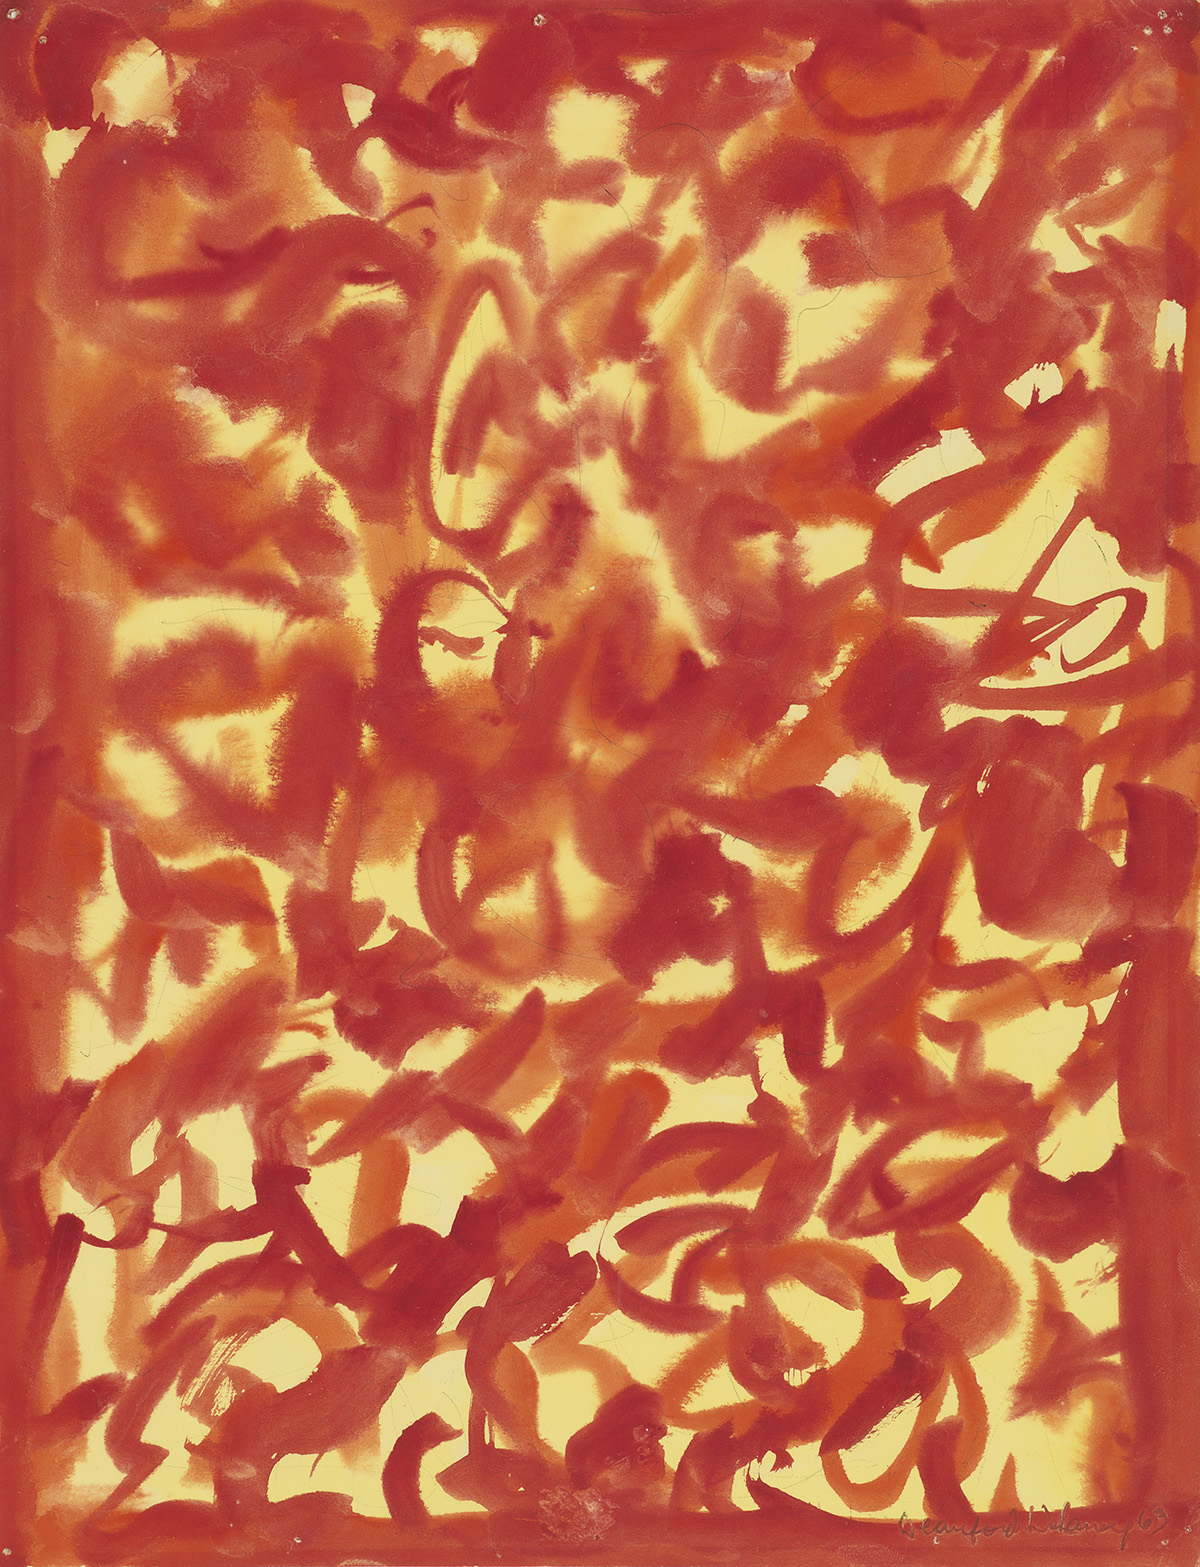 BEAUFORD DELANEY (1901 - 1979) Untitled (Red and Yellow Composition).